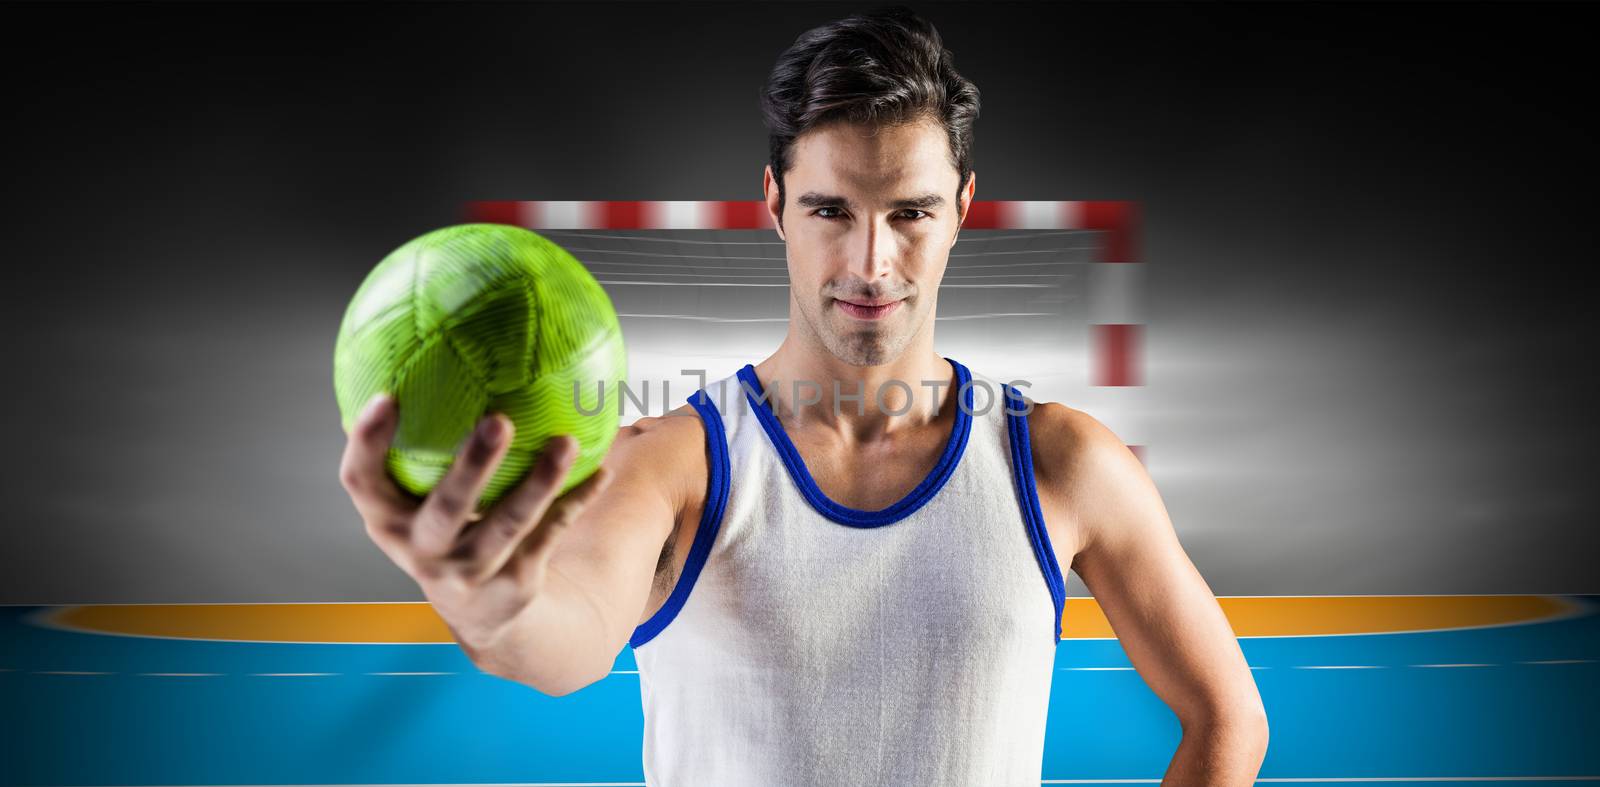 Composite image of portrait of happy male athlete holding a ball by Wavebreakmedia